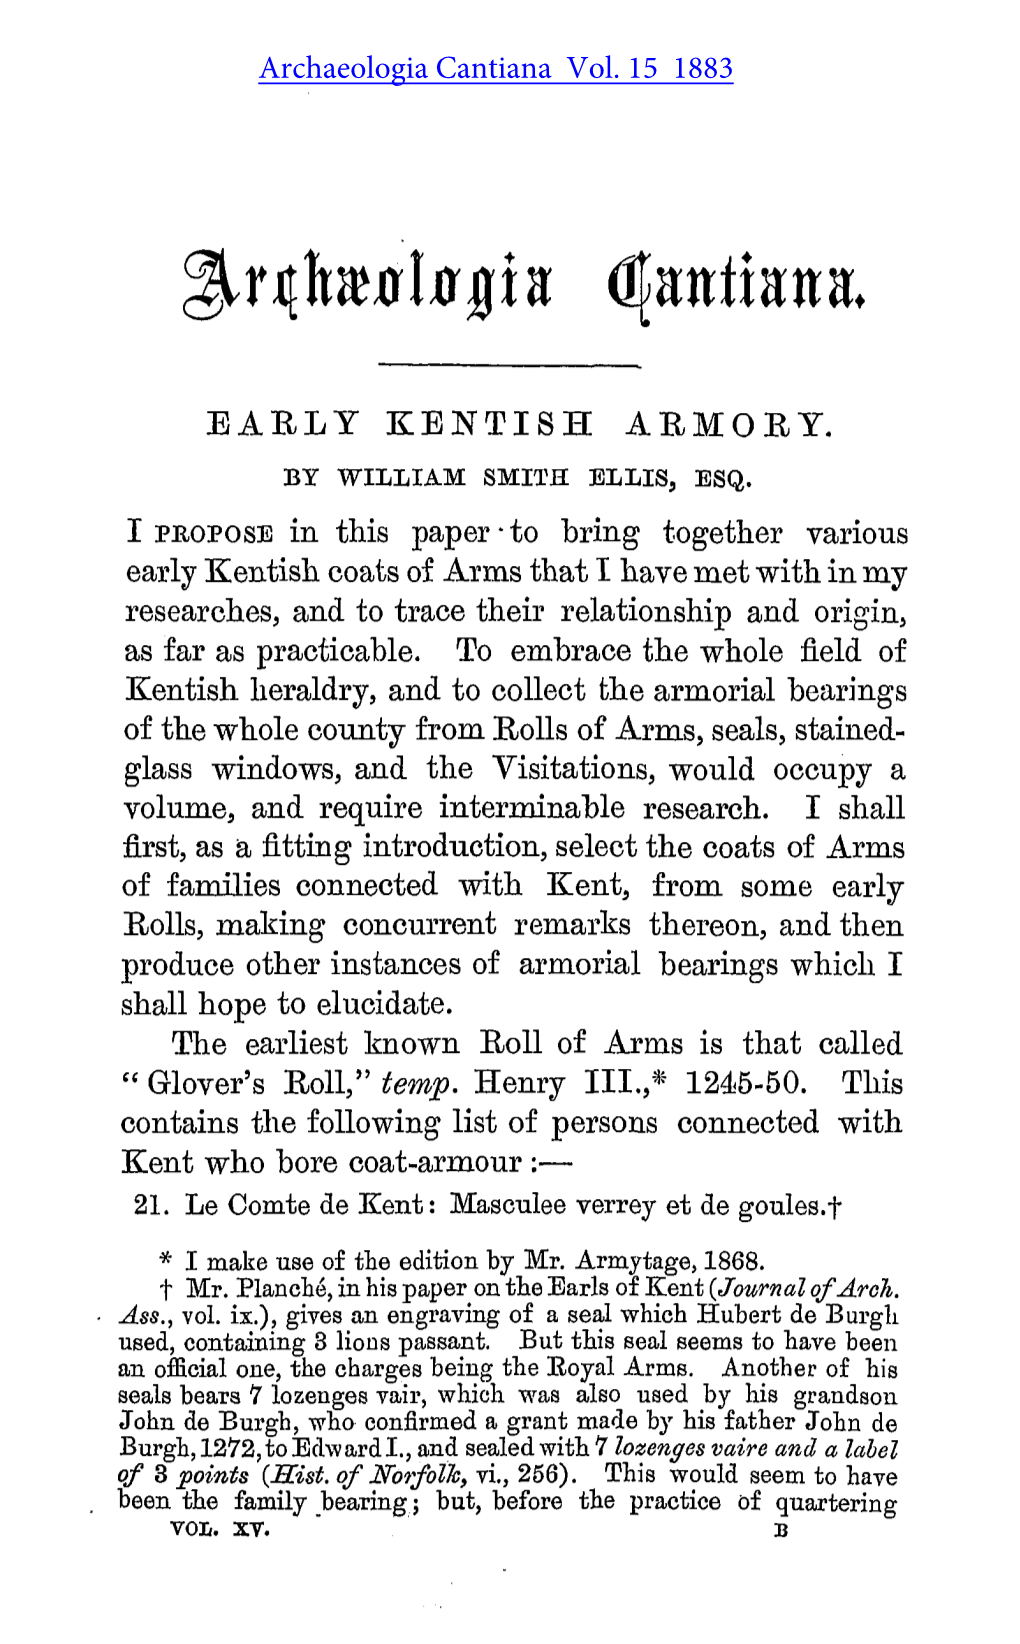 Early Kent Armory